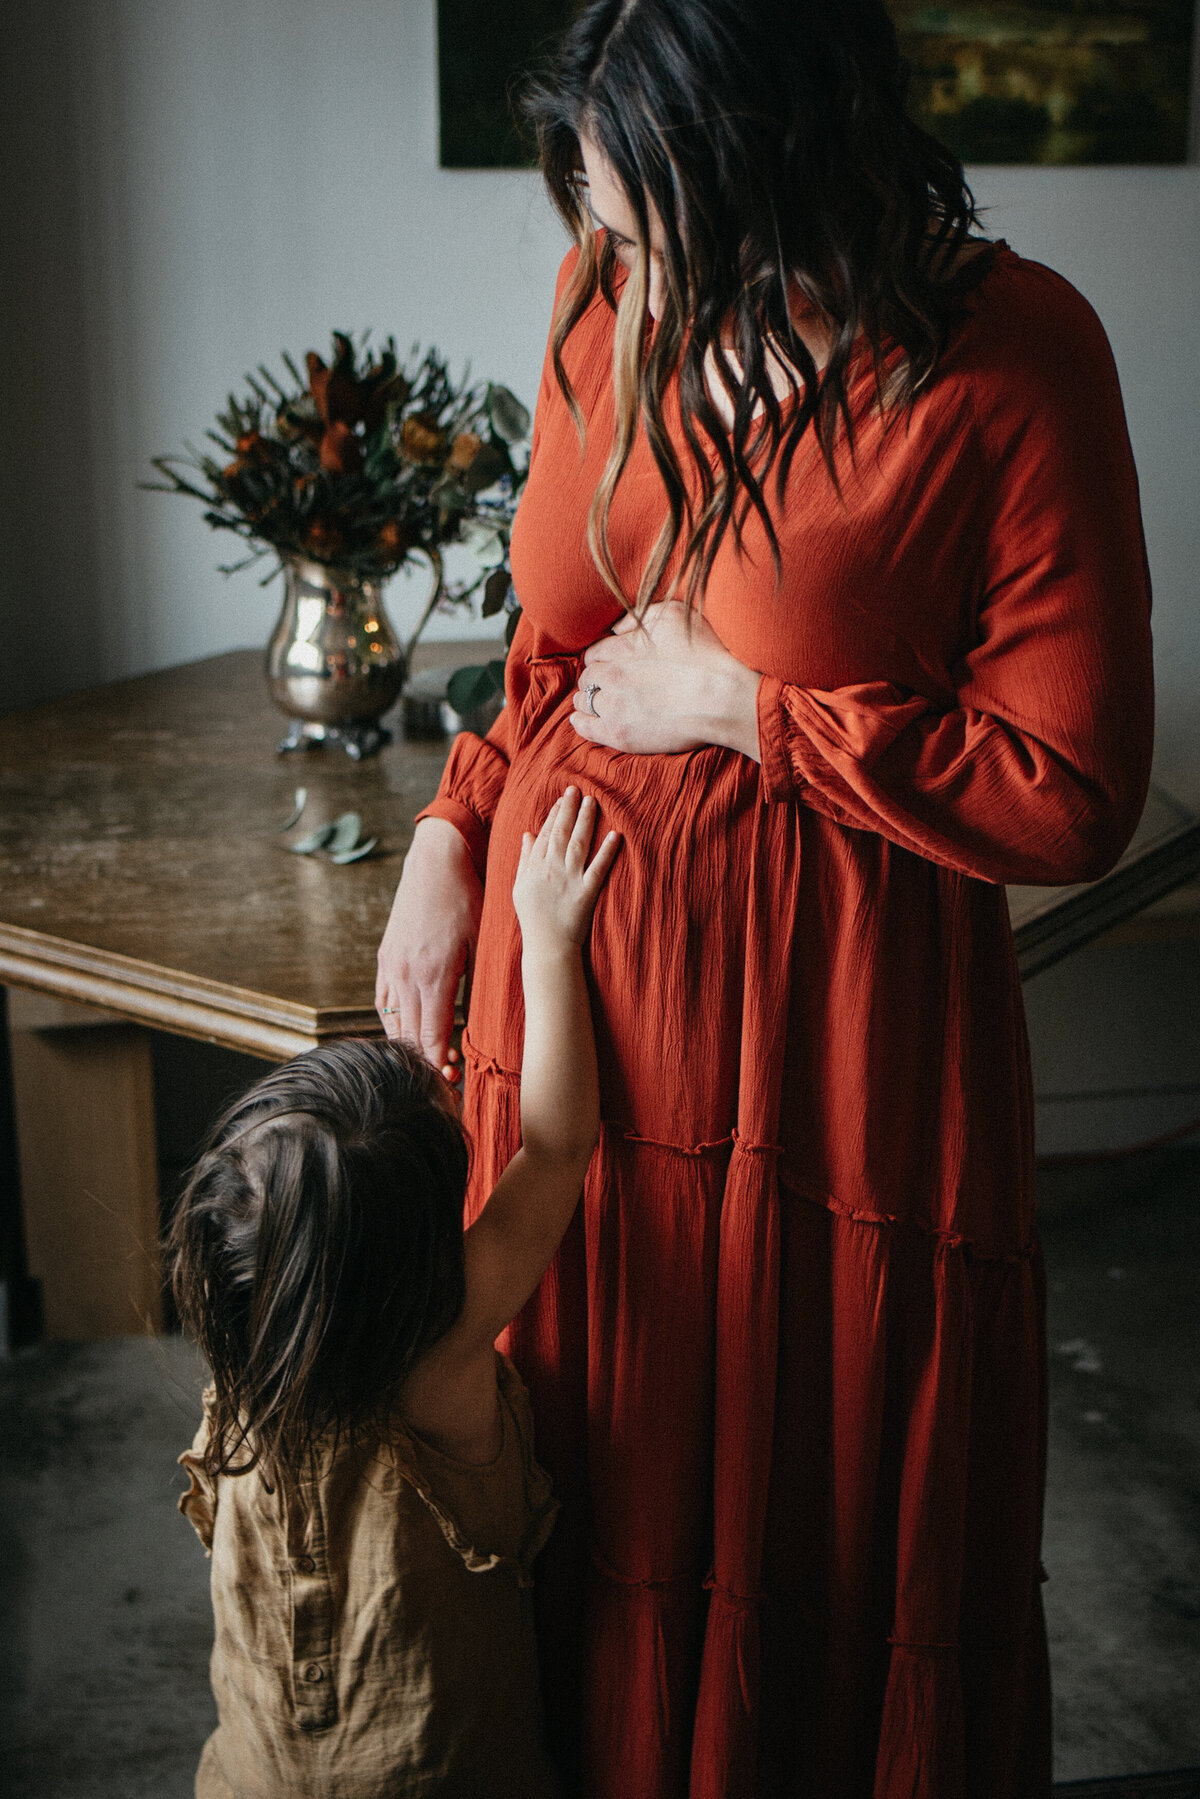 Maternity photo session at Wildwood Cafe Stoughton, Wisconsin